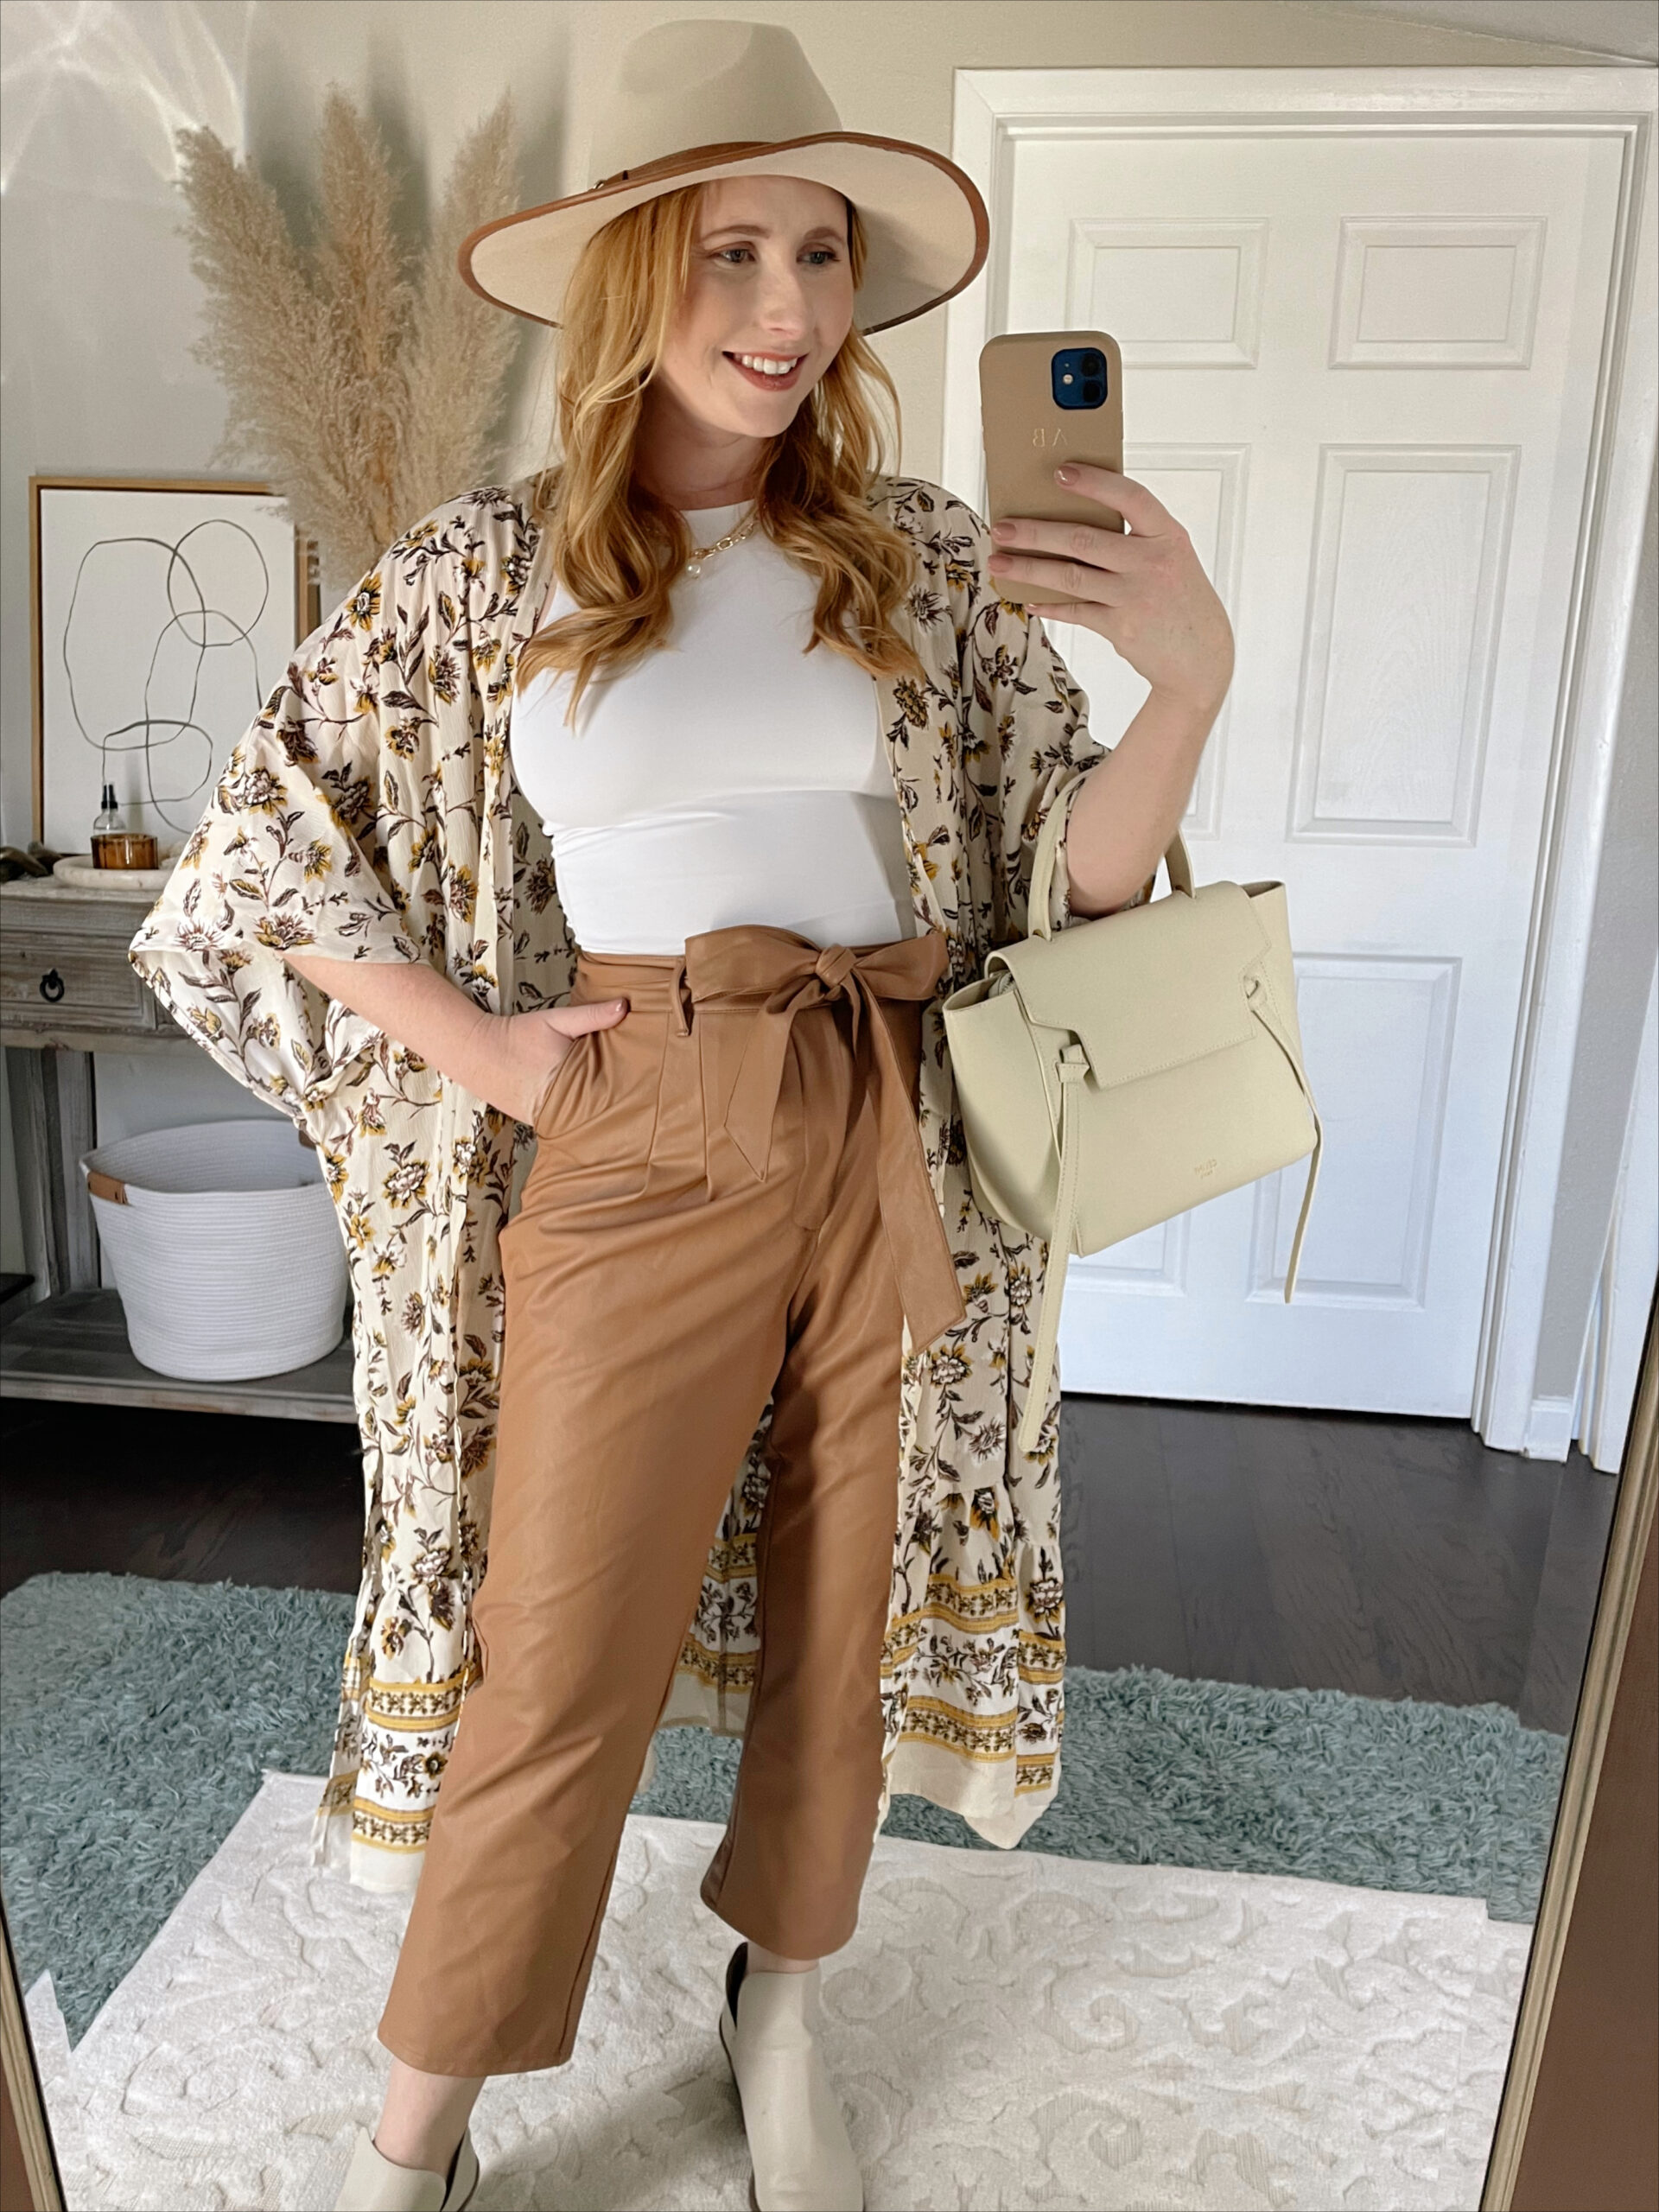 See and Shop the Faux Leather Paperbag Pants at Target, Who What Wear